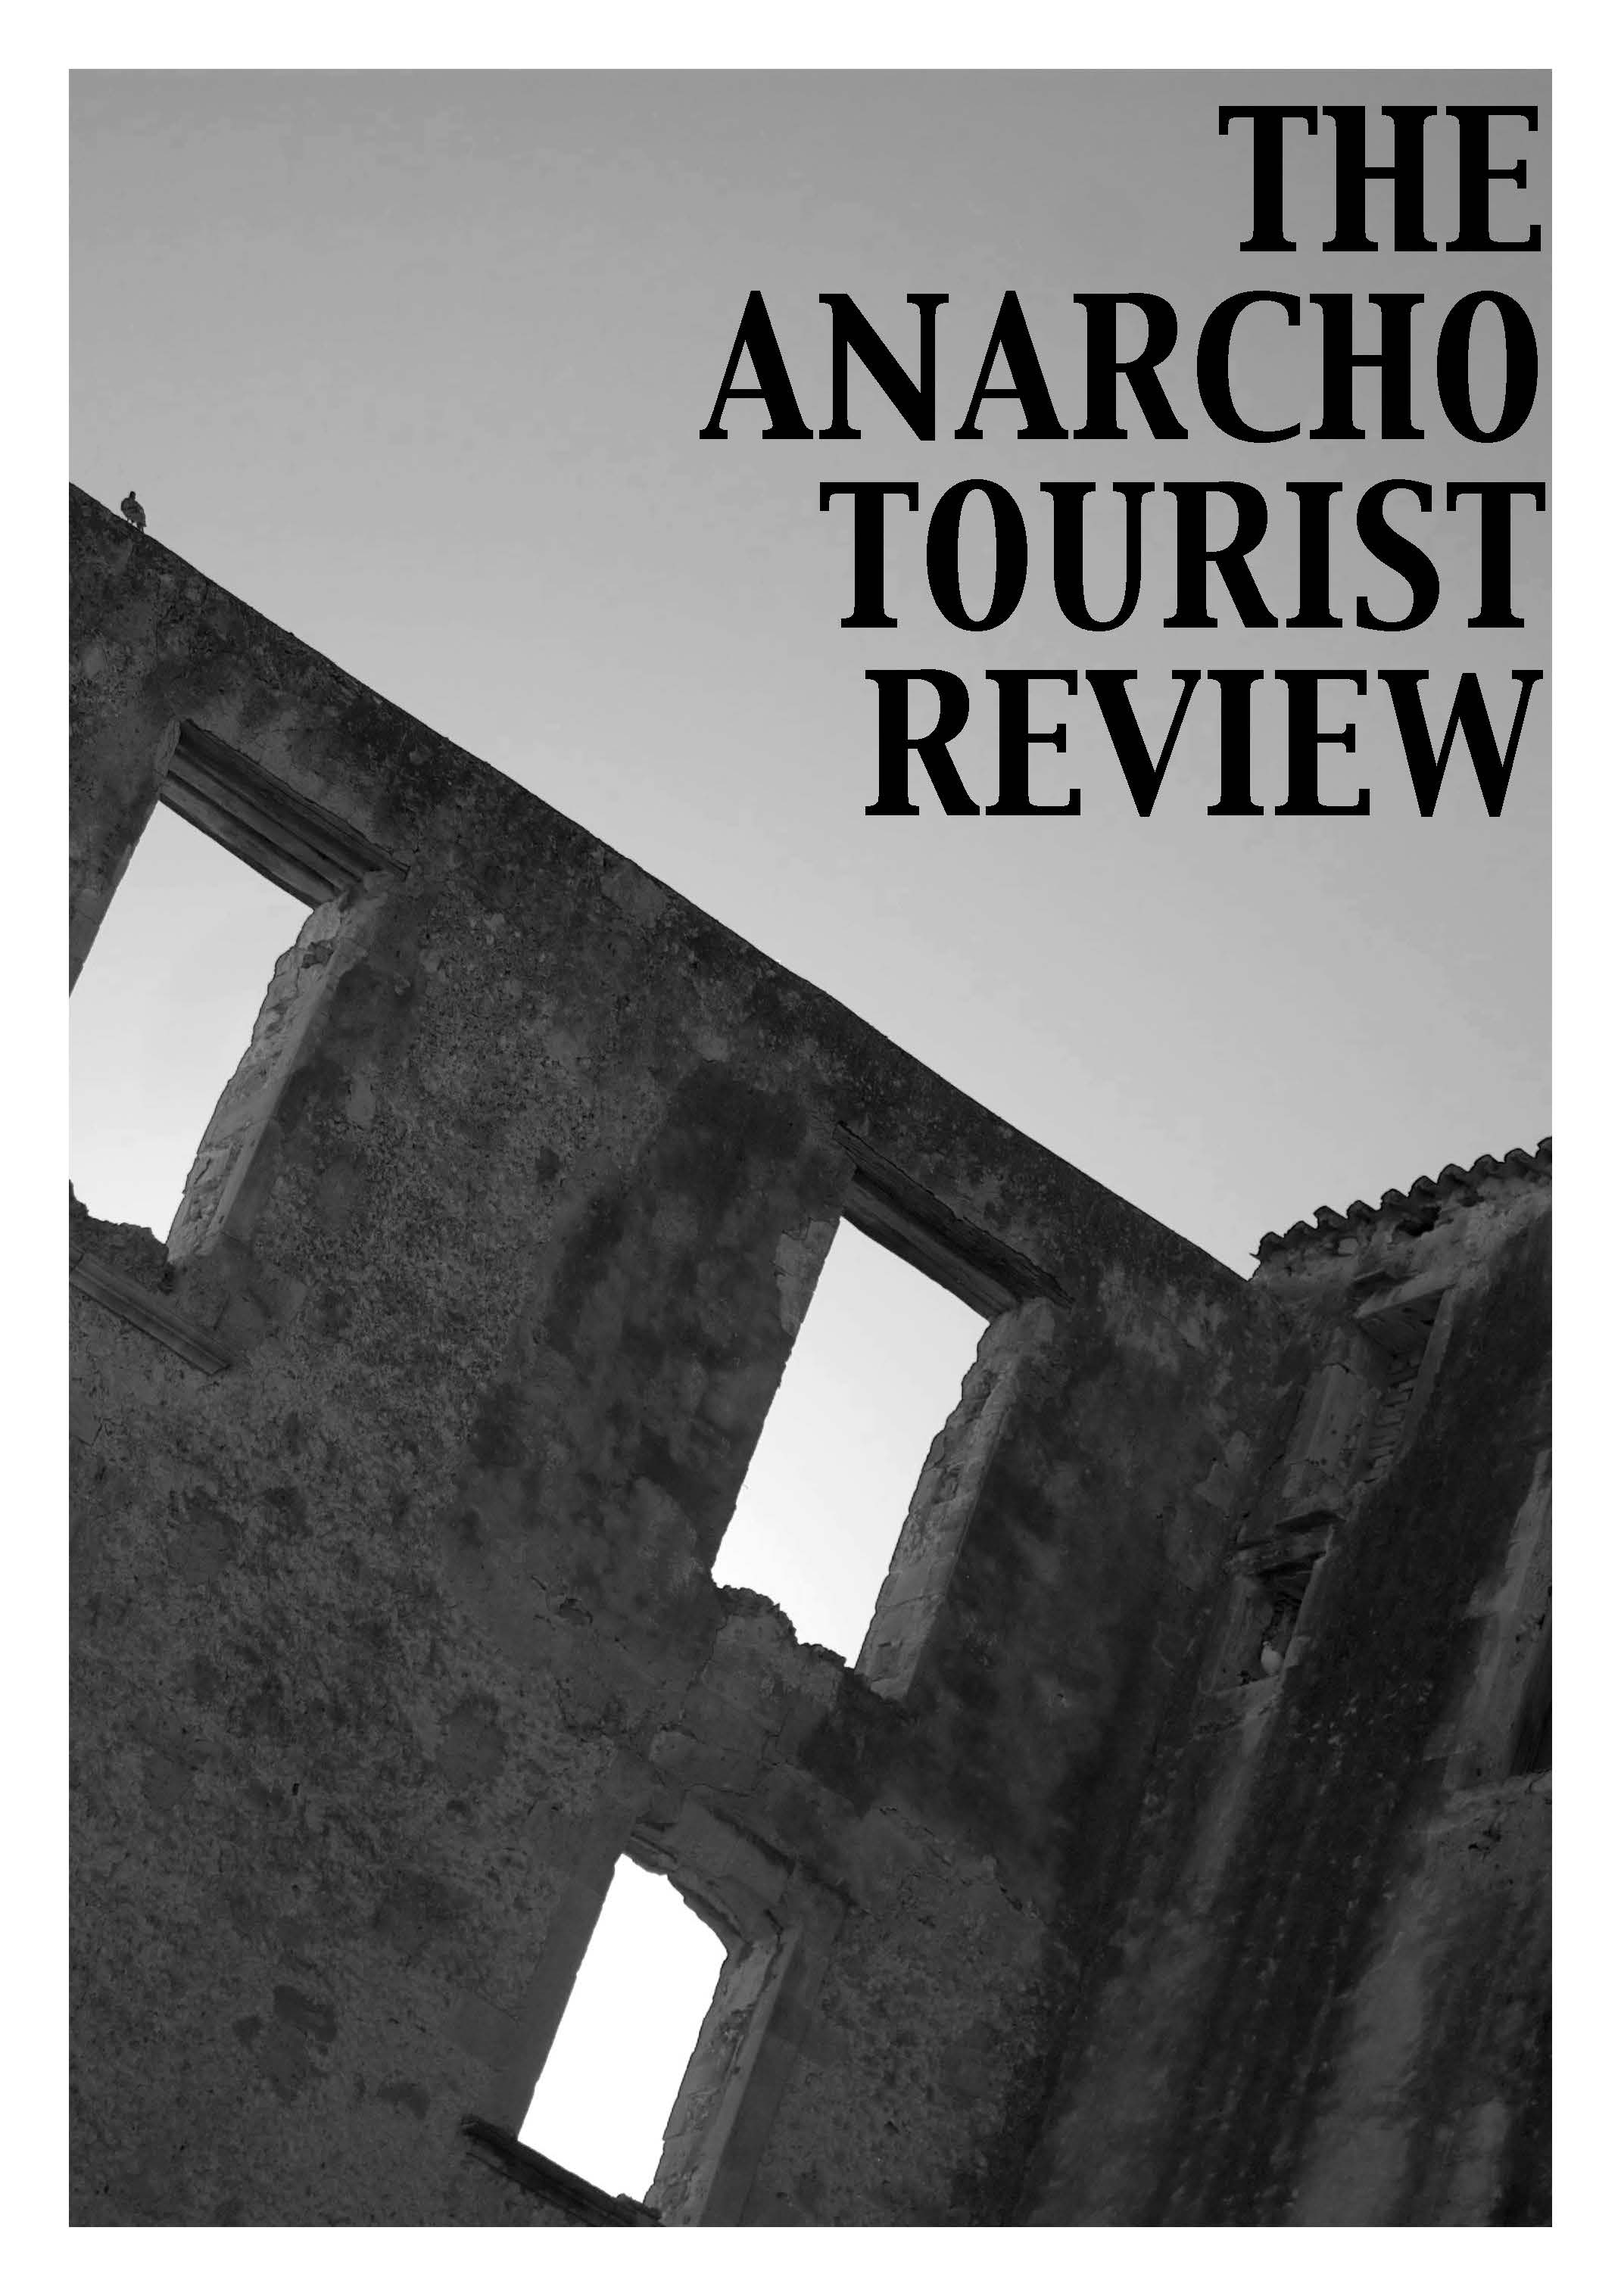 The Anarcho Tourist Review – Issue 2, March 2017